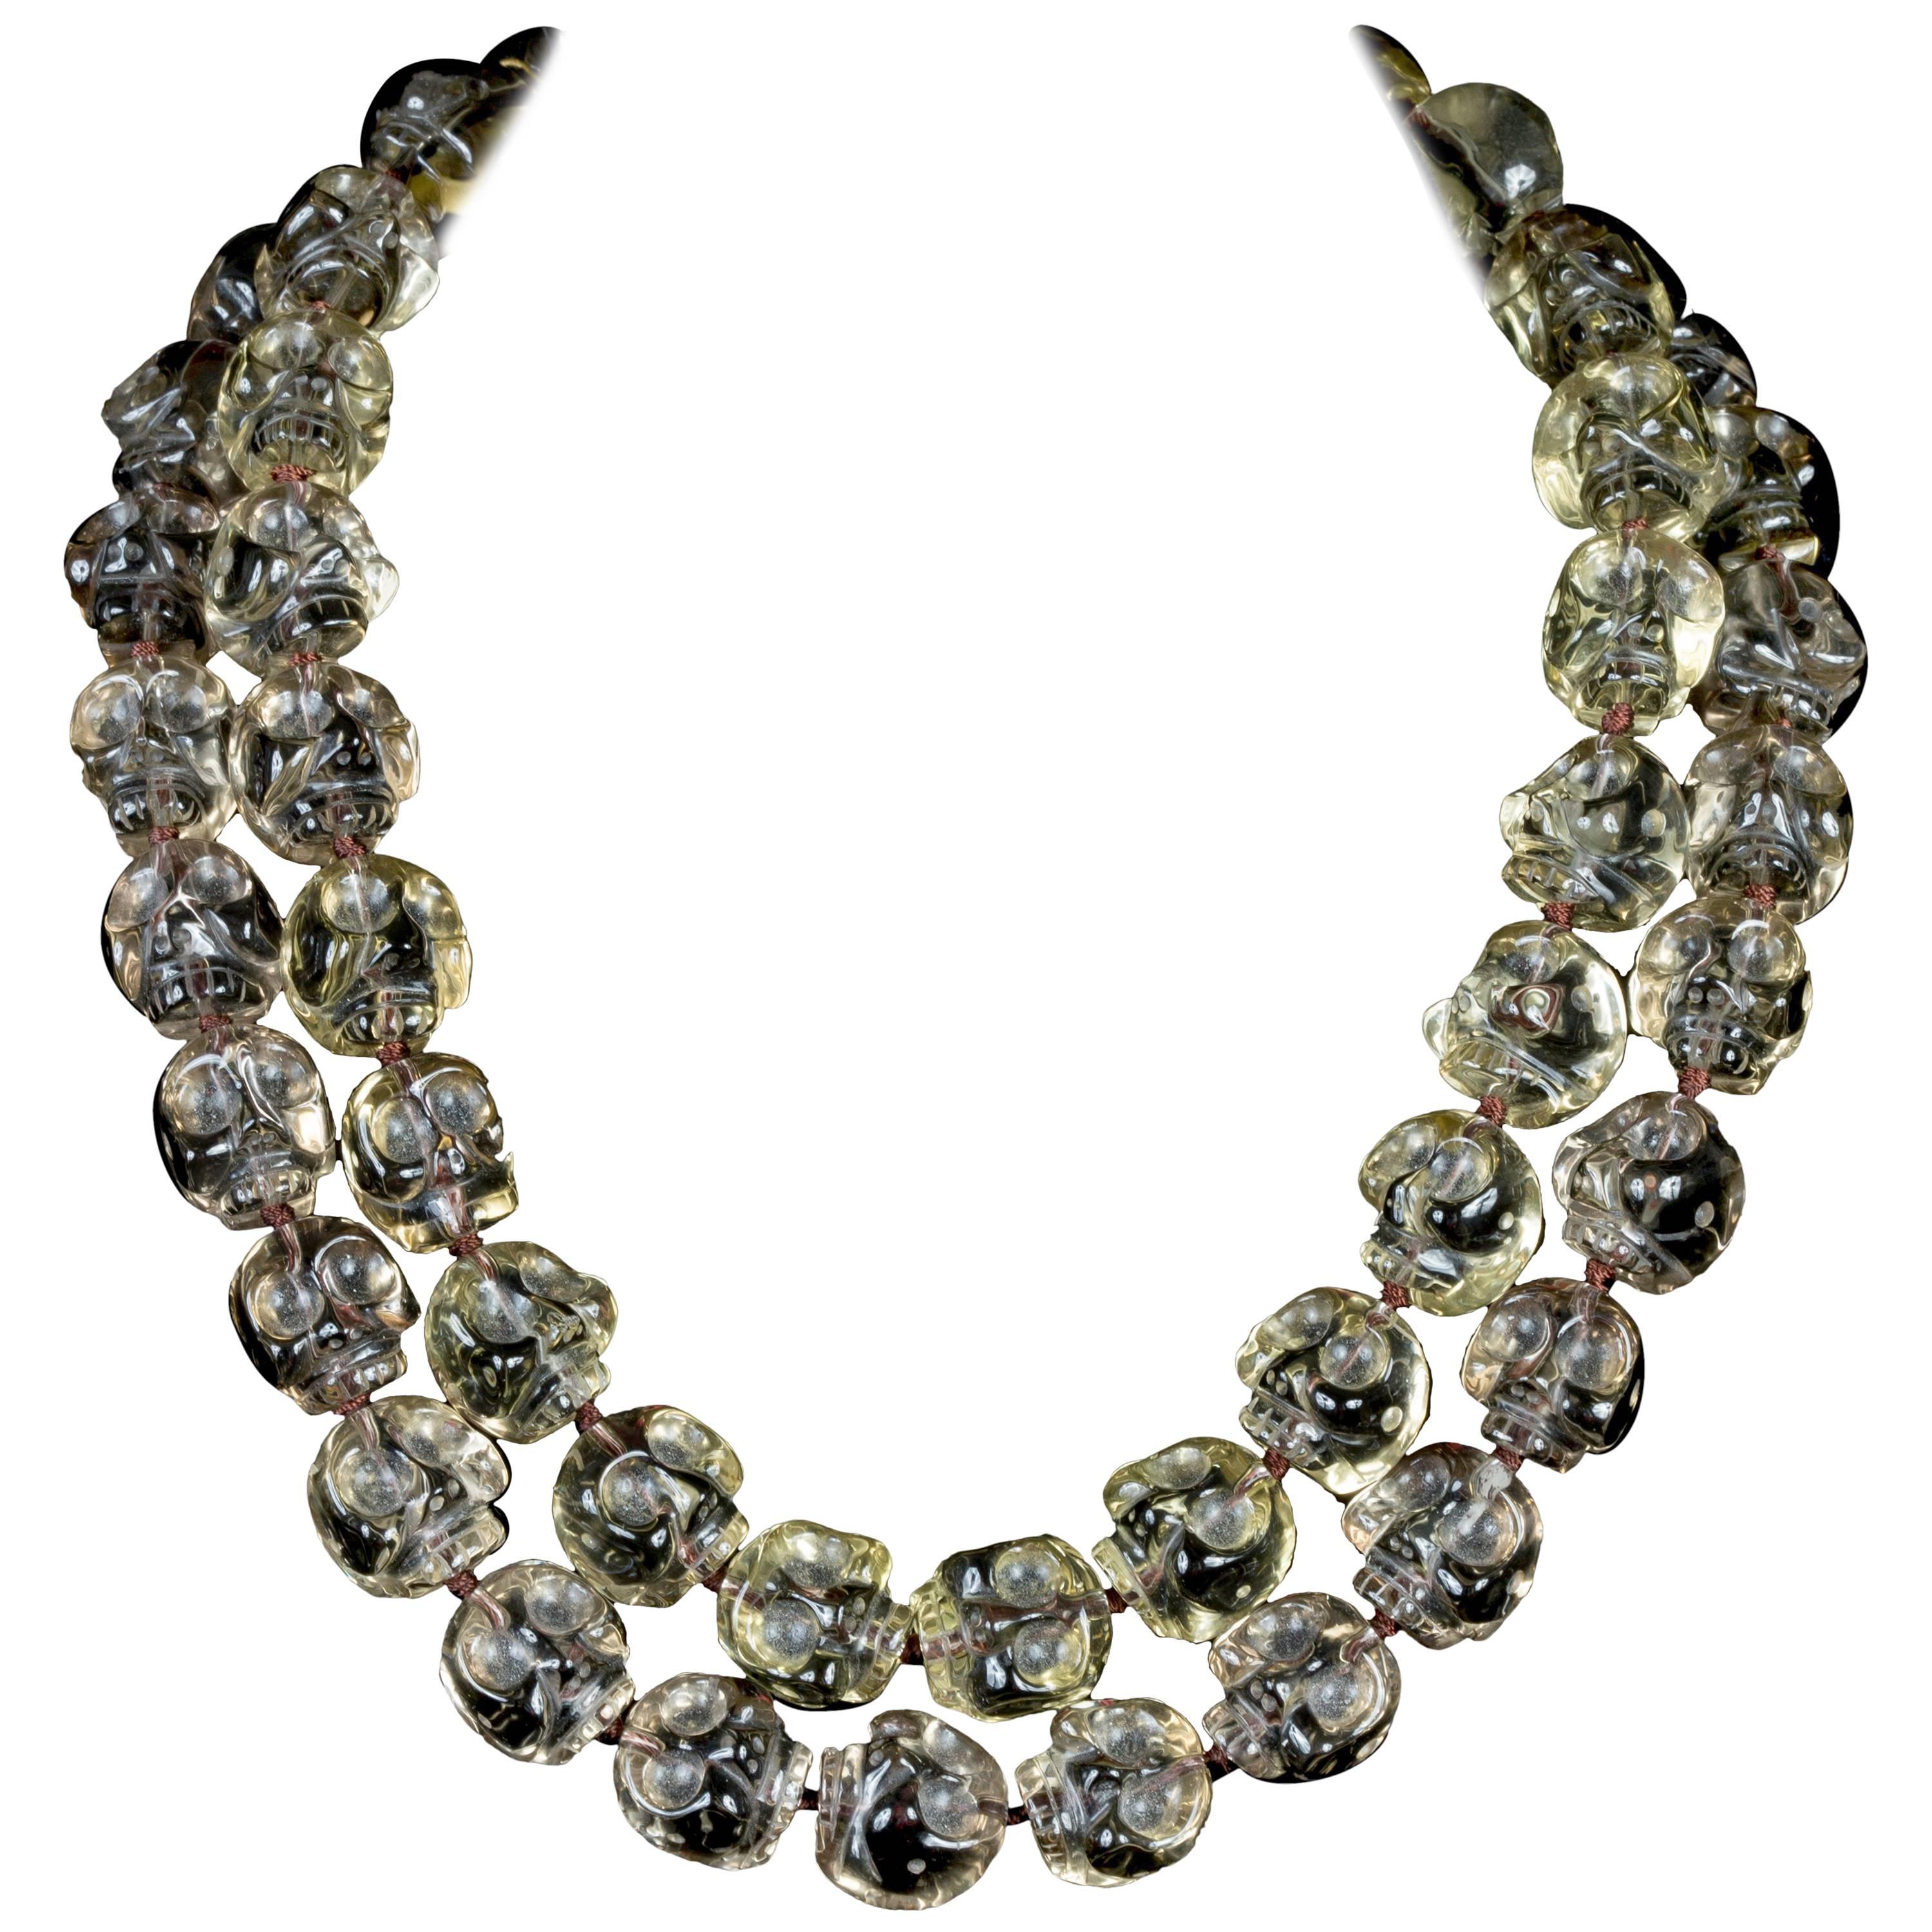 Beautifully Carved Smoky Quartz Skulls in Double Line Necklace